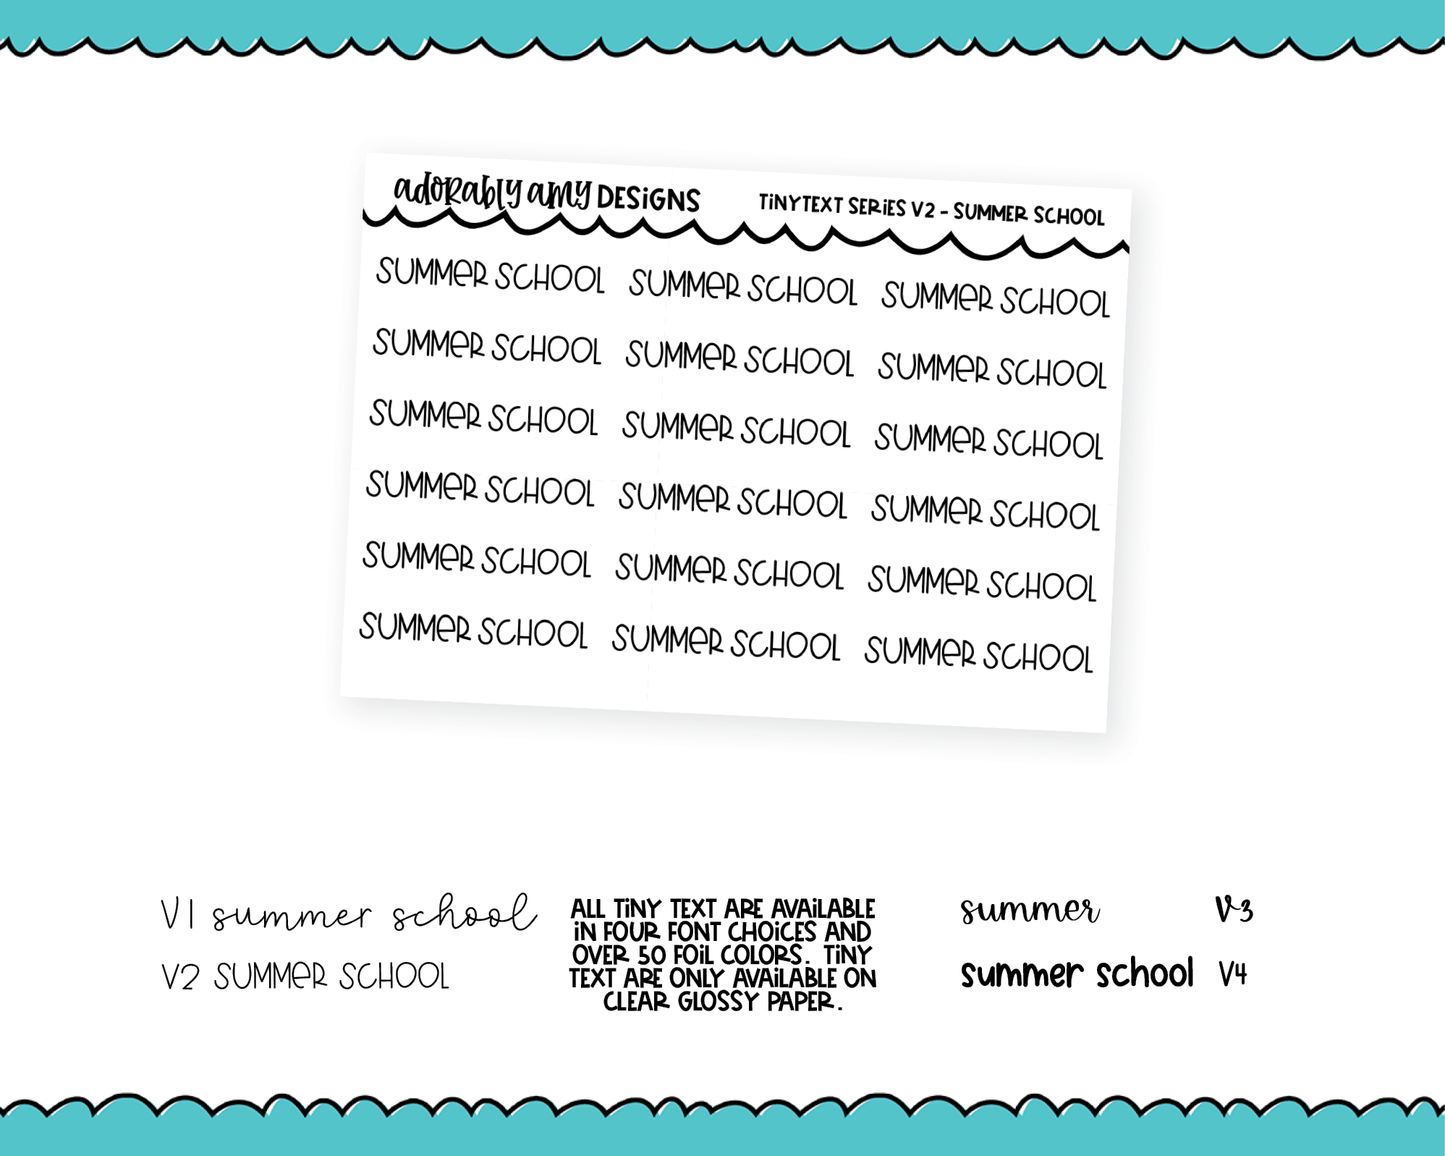 Foiled Tiny Text Series - Summer School Checklist Size Planner Stickers for any Planner or Insert